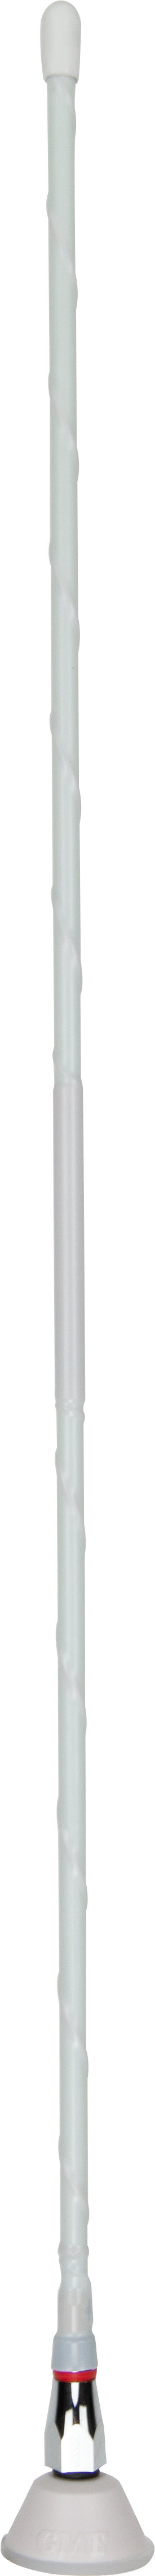 600mm-27mhz-ground-dependent-antenna-base-cable-and-plug---white